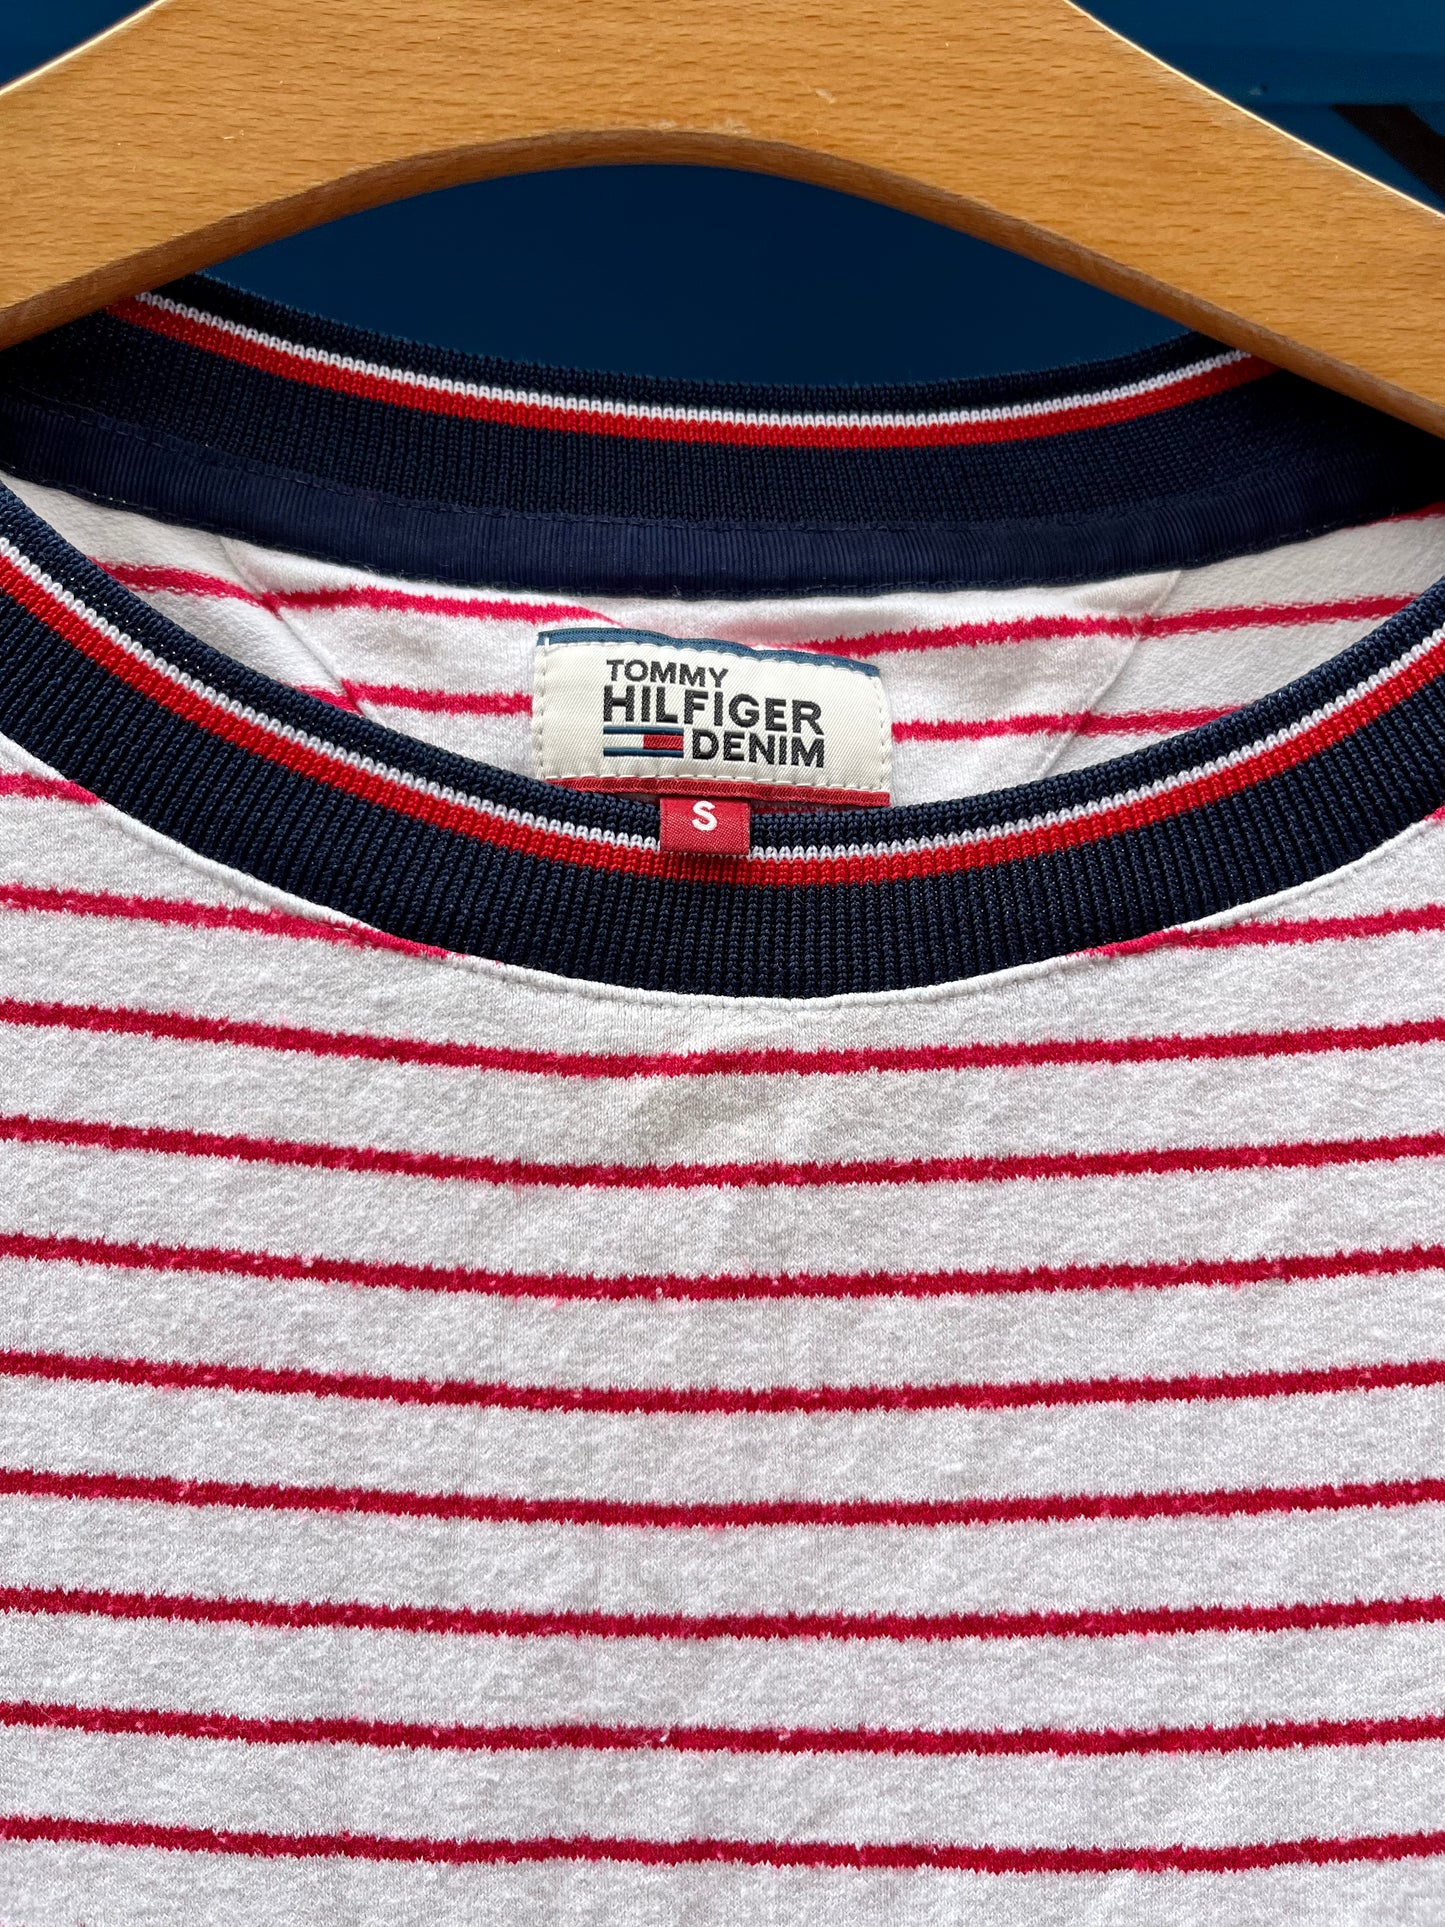 Le t-shirt, TOMMY HILFIGER, taille S